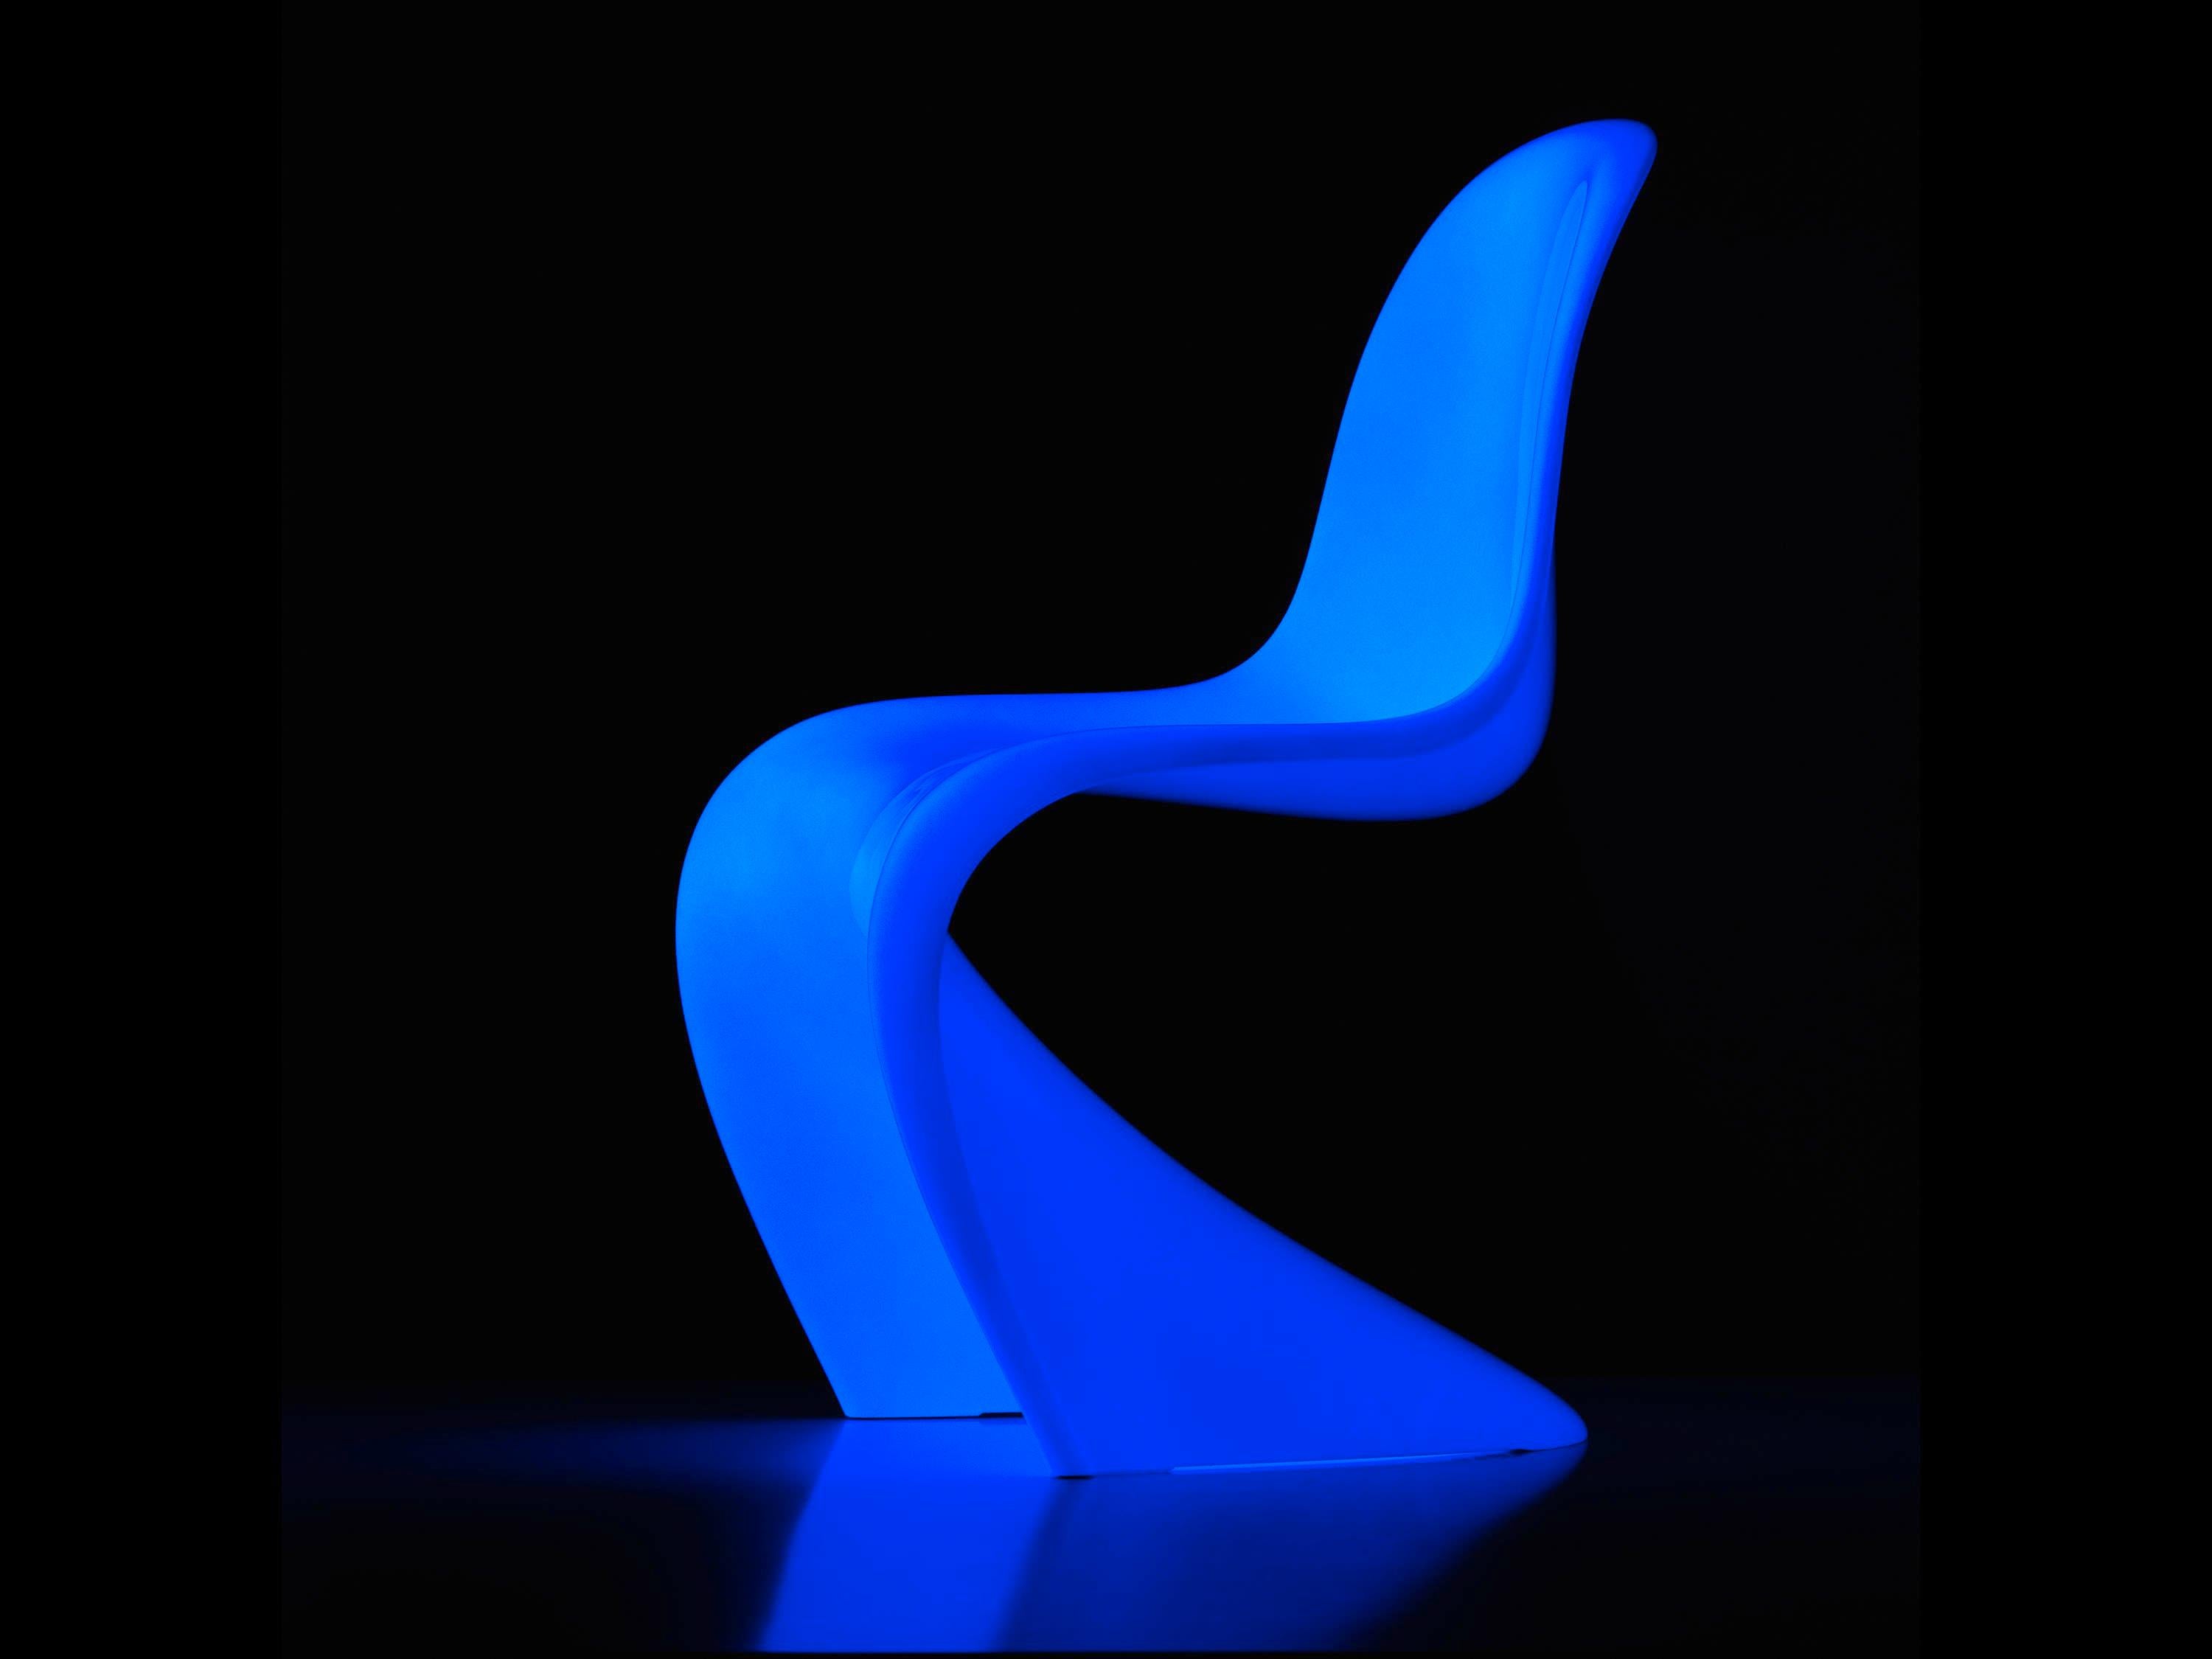 Vitra 'Glow Panton chair', luminescent, white, limited edition 1 chair of only 333 pieces ever produced. Released and sold in June 2018 on the occasion of the 50th anniversary of the first presentation of the iconic 'Panton Chair' to the public.
